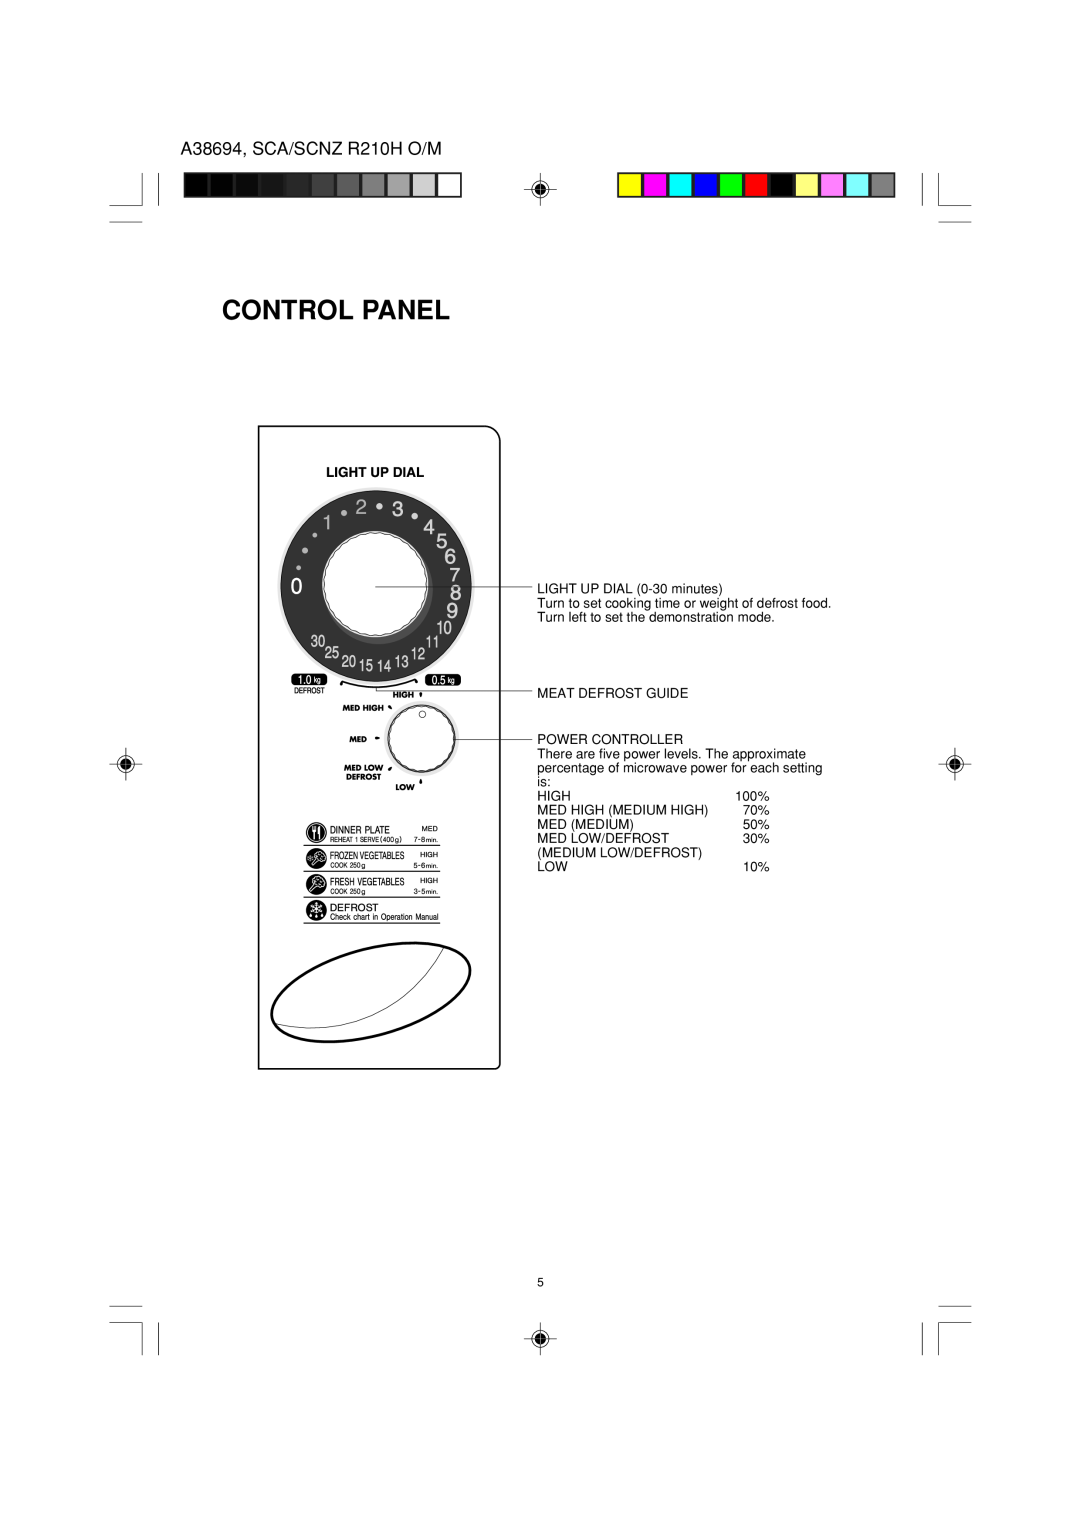 Sharp R-210H operation manual Control Panel, A38694, SCA/SCNZ R210H O/M, 30 25 20 15 14 